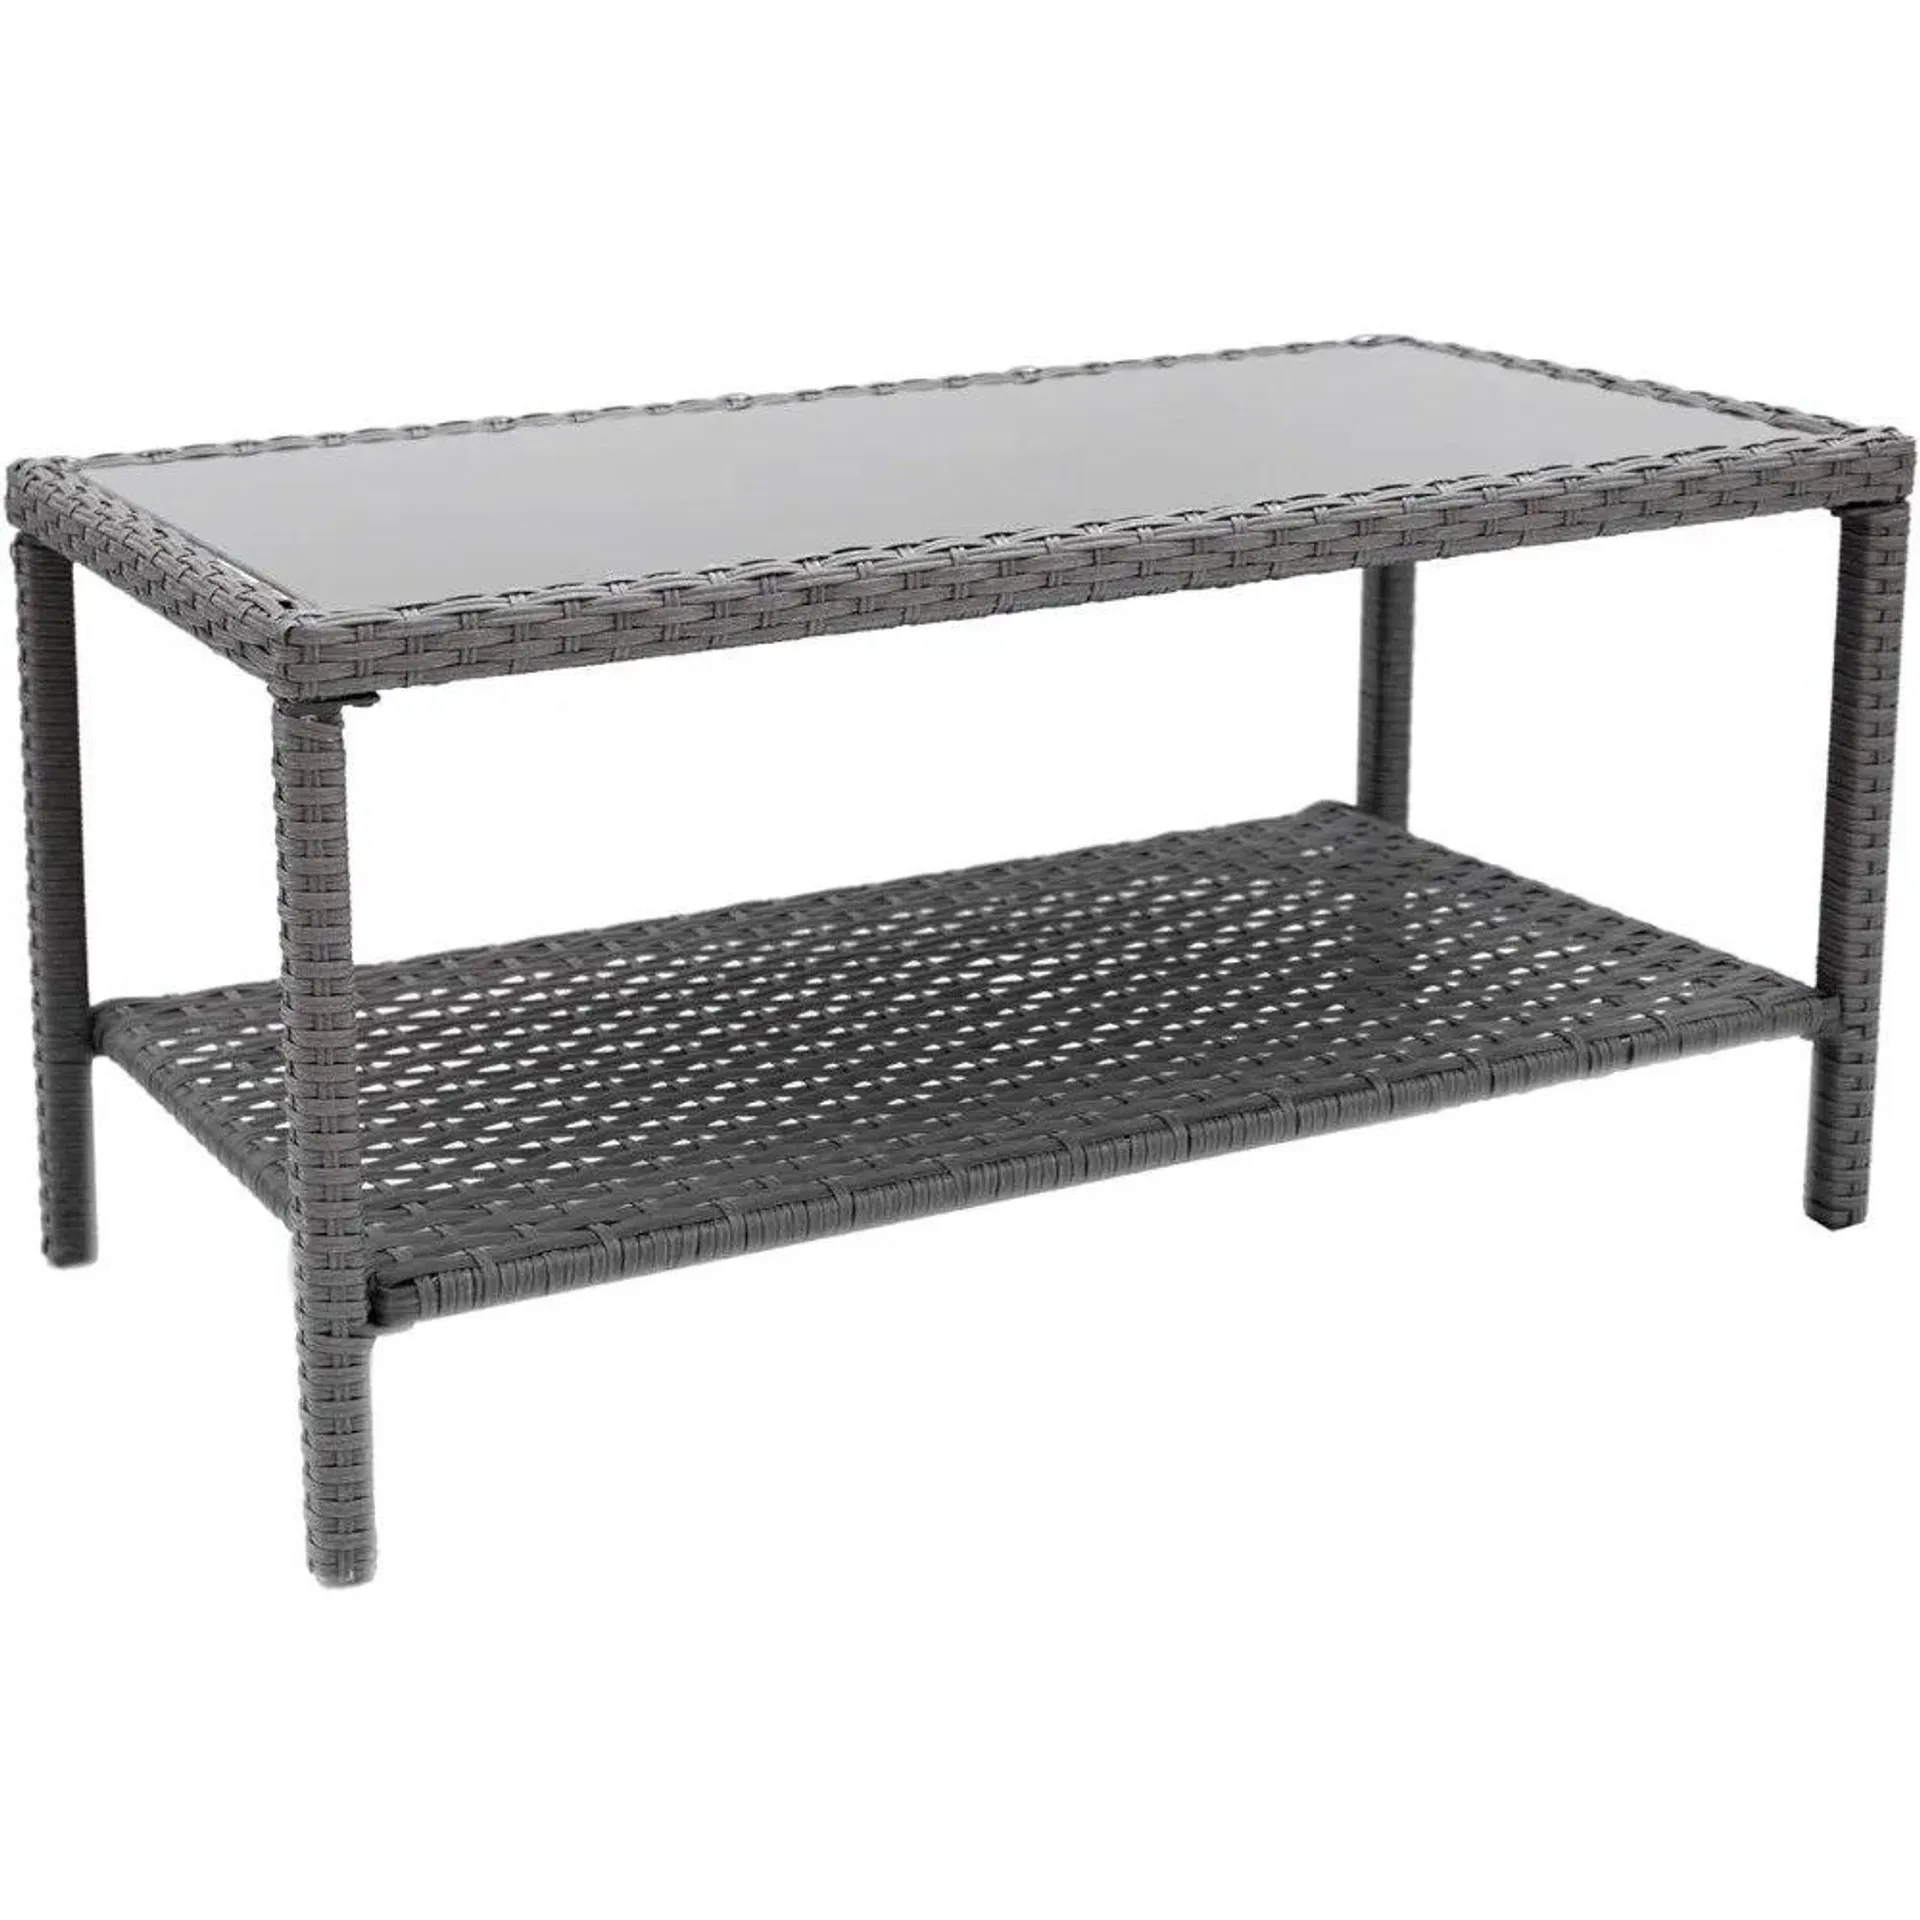 Gray All Weather Wicker With Glass Top Camping Table Small Outdoor Coffee Side End Table for Outside Patio Storage Furniture